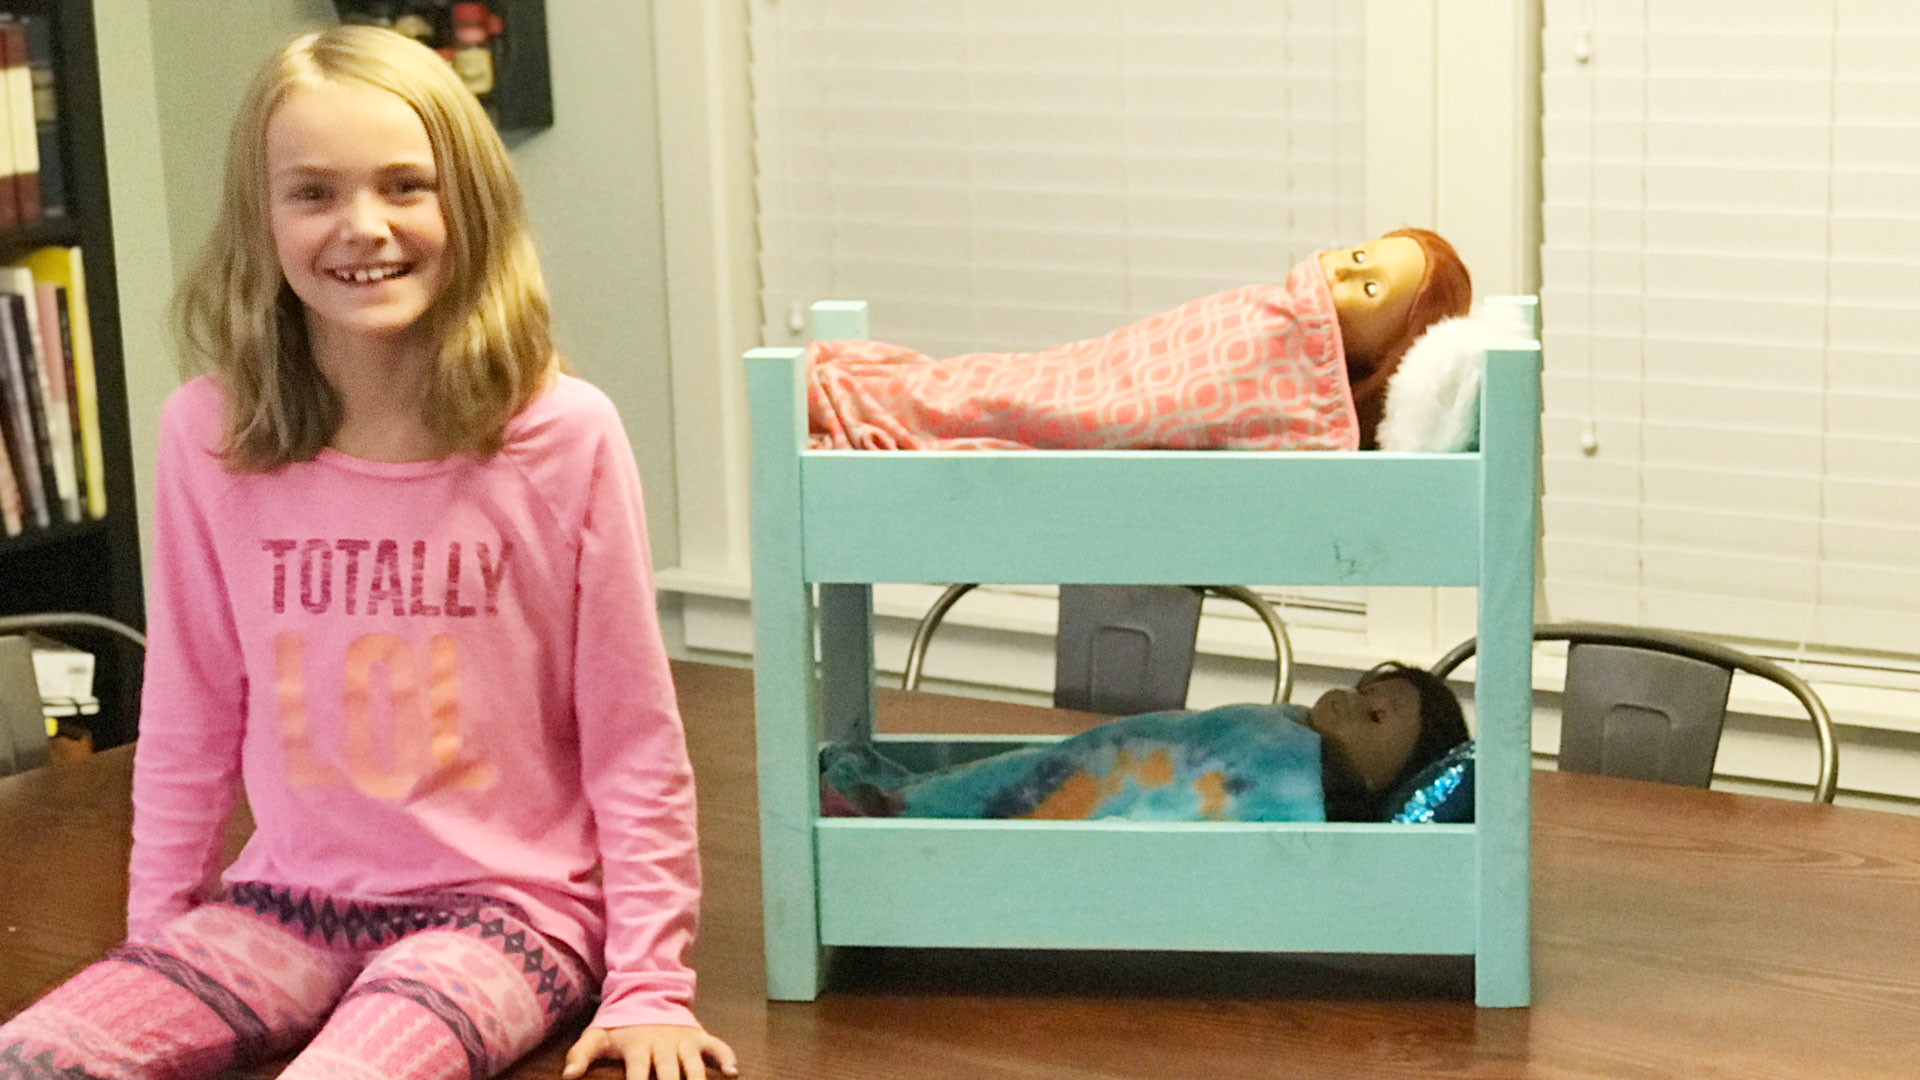 Build An American Girl Doll Bunk Bed, How To Make An American Girl Doll Bunk Bed Out Of Cardboard